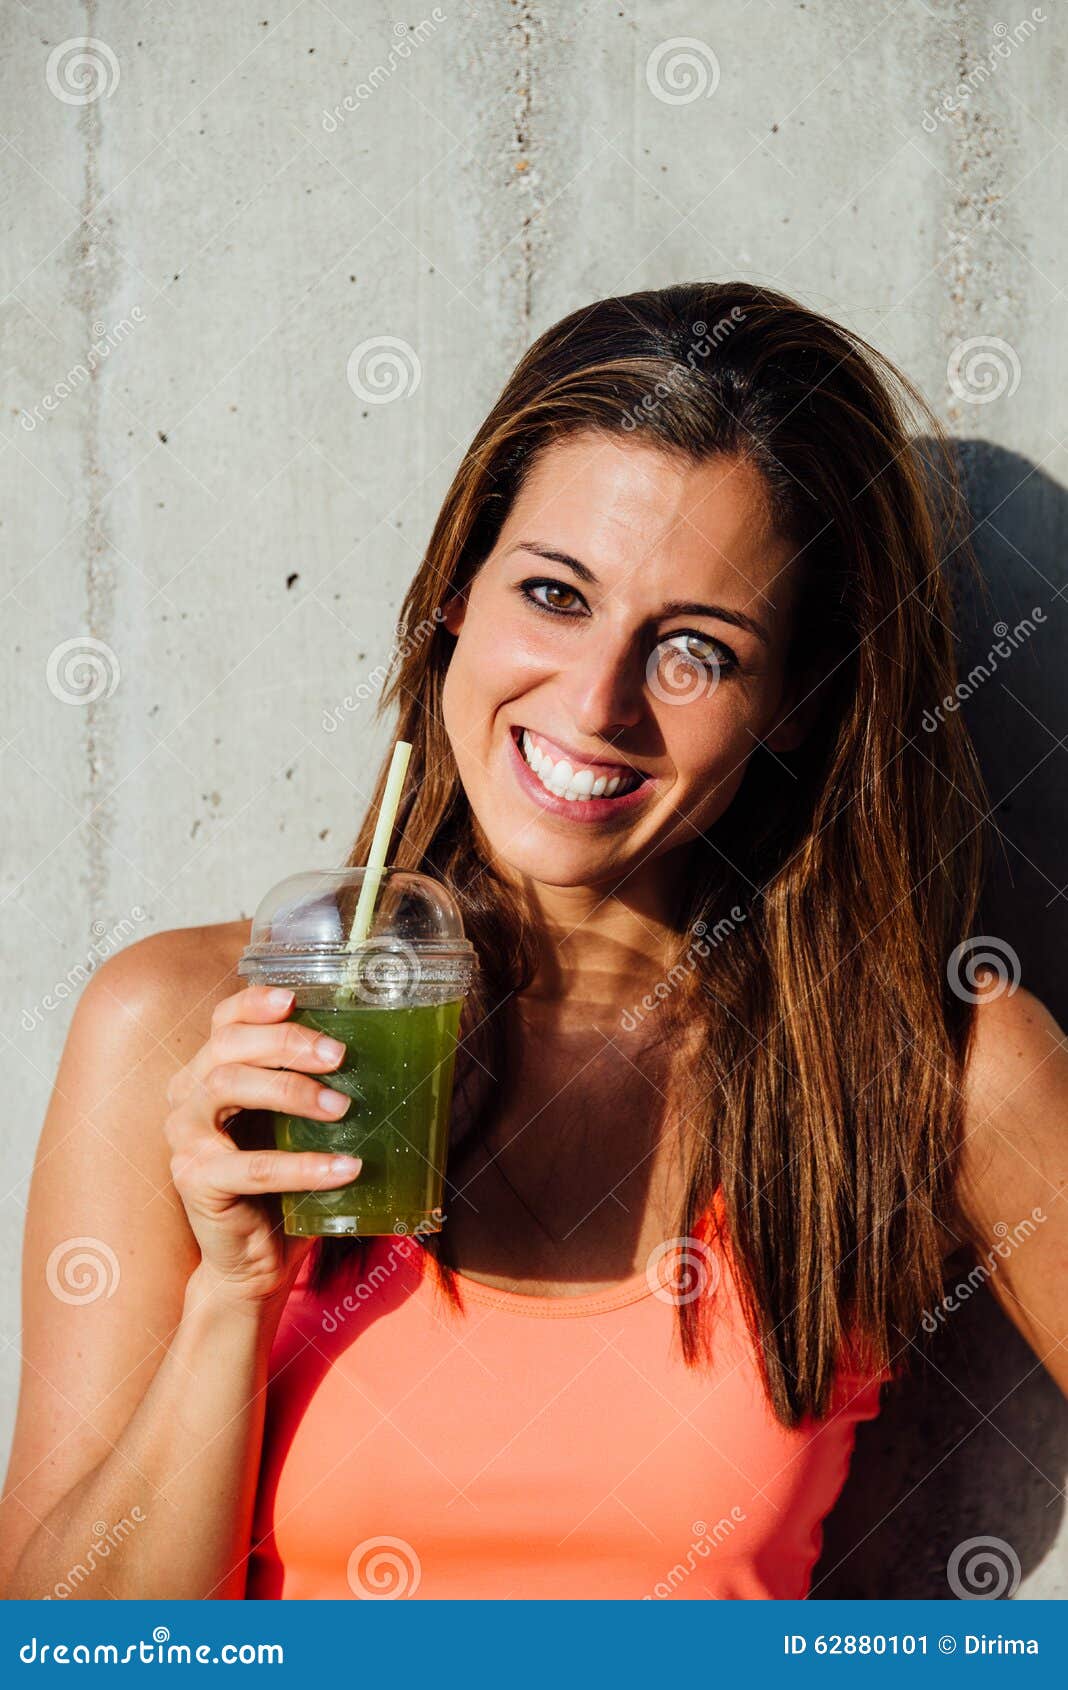 Healthy Fitness Woman Drinking Detox Smoothie Stock Image Image Of Smoothie Happy 62880101 